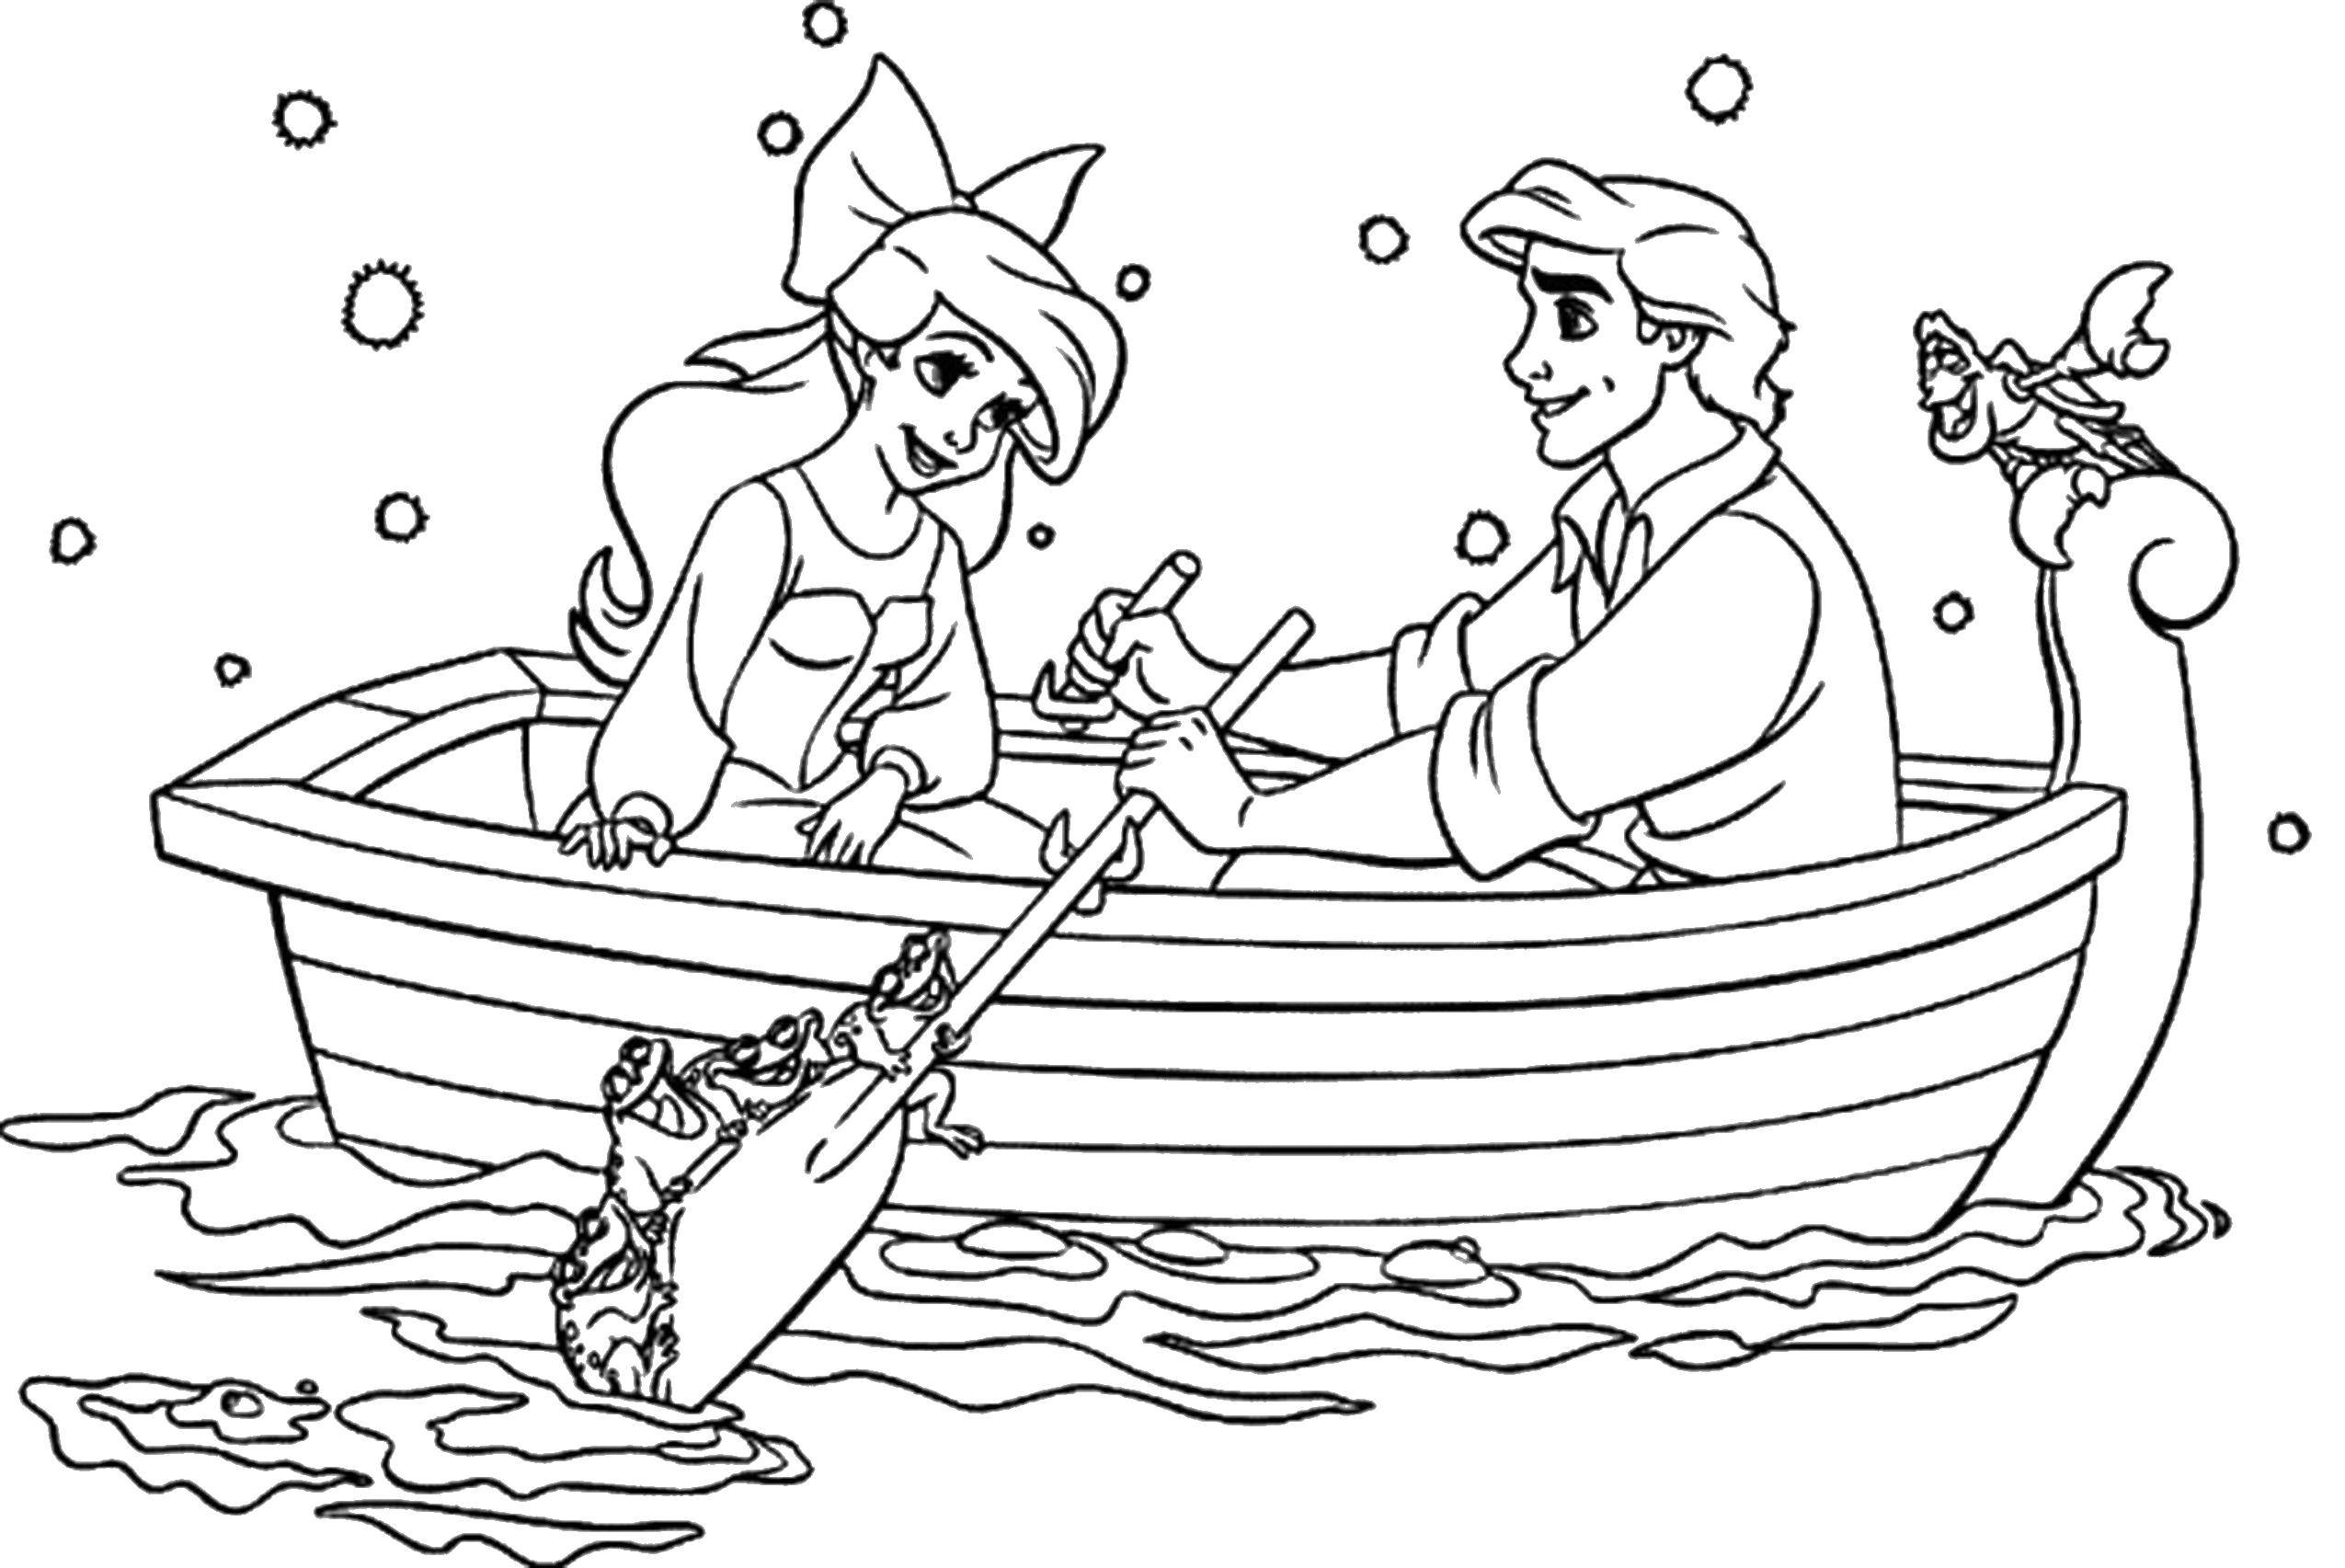 Coloring Ariel with her beloved in a boat. Category coloring. Tags:  Disney, the little mermaid, Ariel.